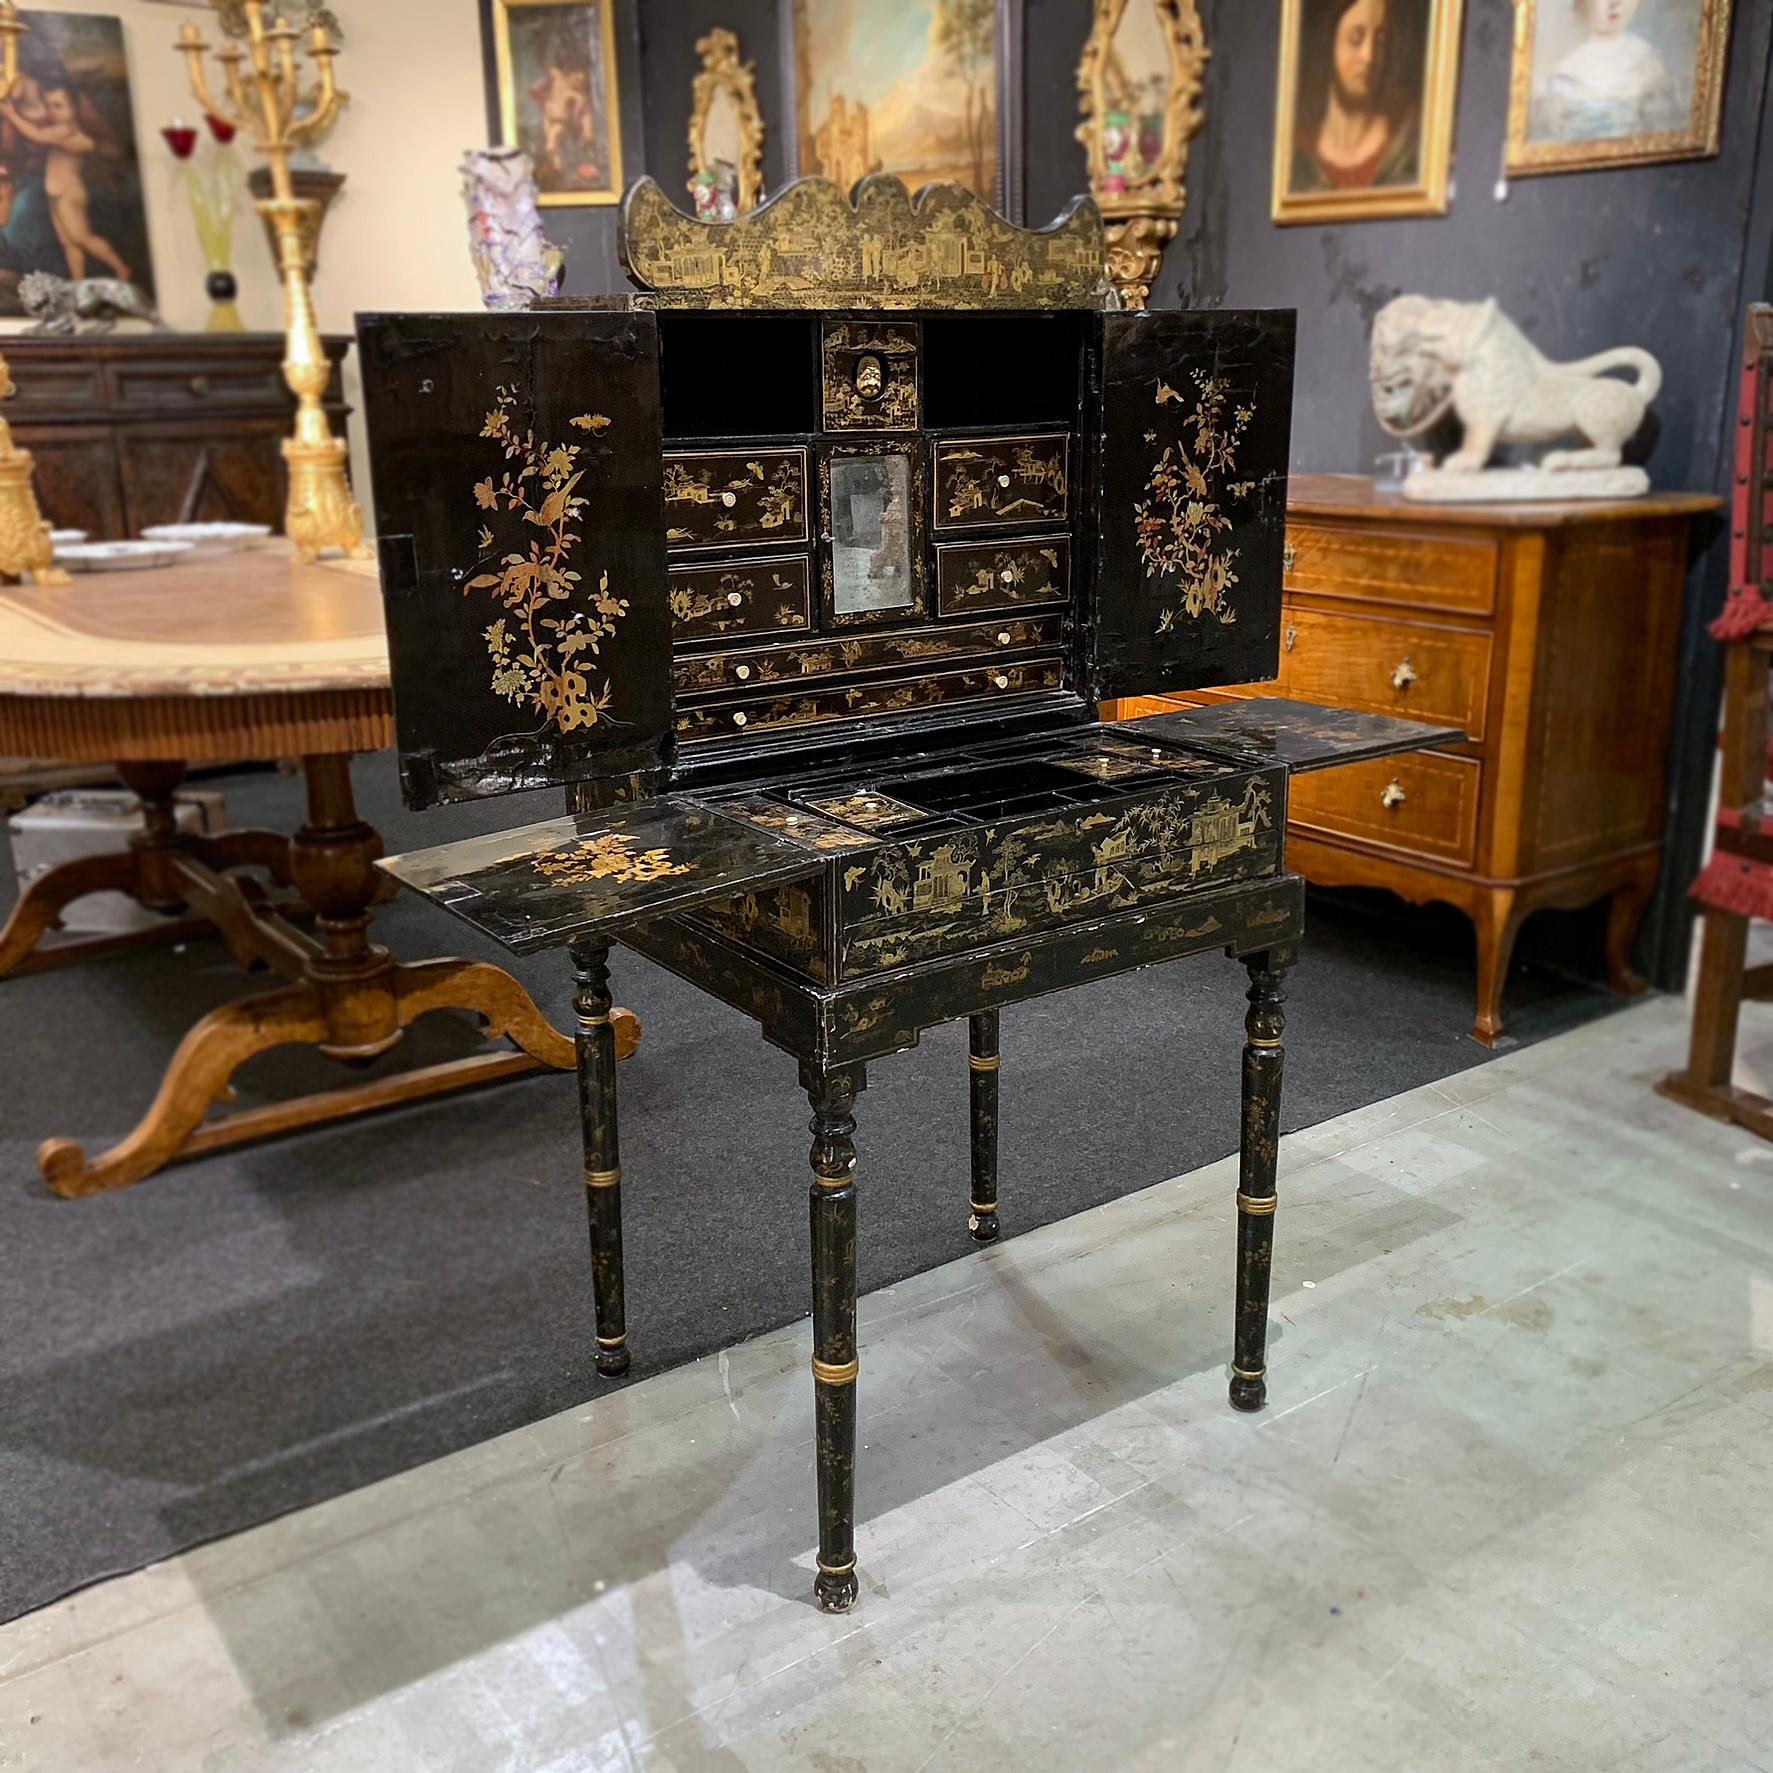 Stunning travel cabinet in ebonized wood, made in China, dating back to around the 19th century during the Qing dynasty. Made with precious materials such as the chalky background and rice paper, it is decorated with scenes painted on a graffitied